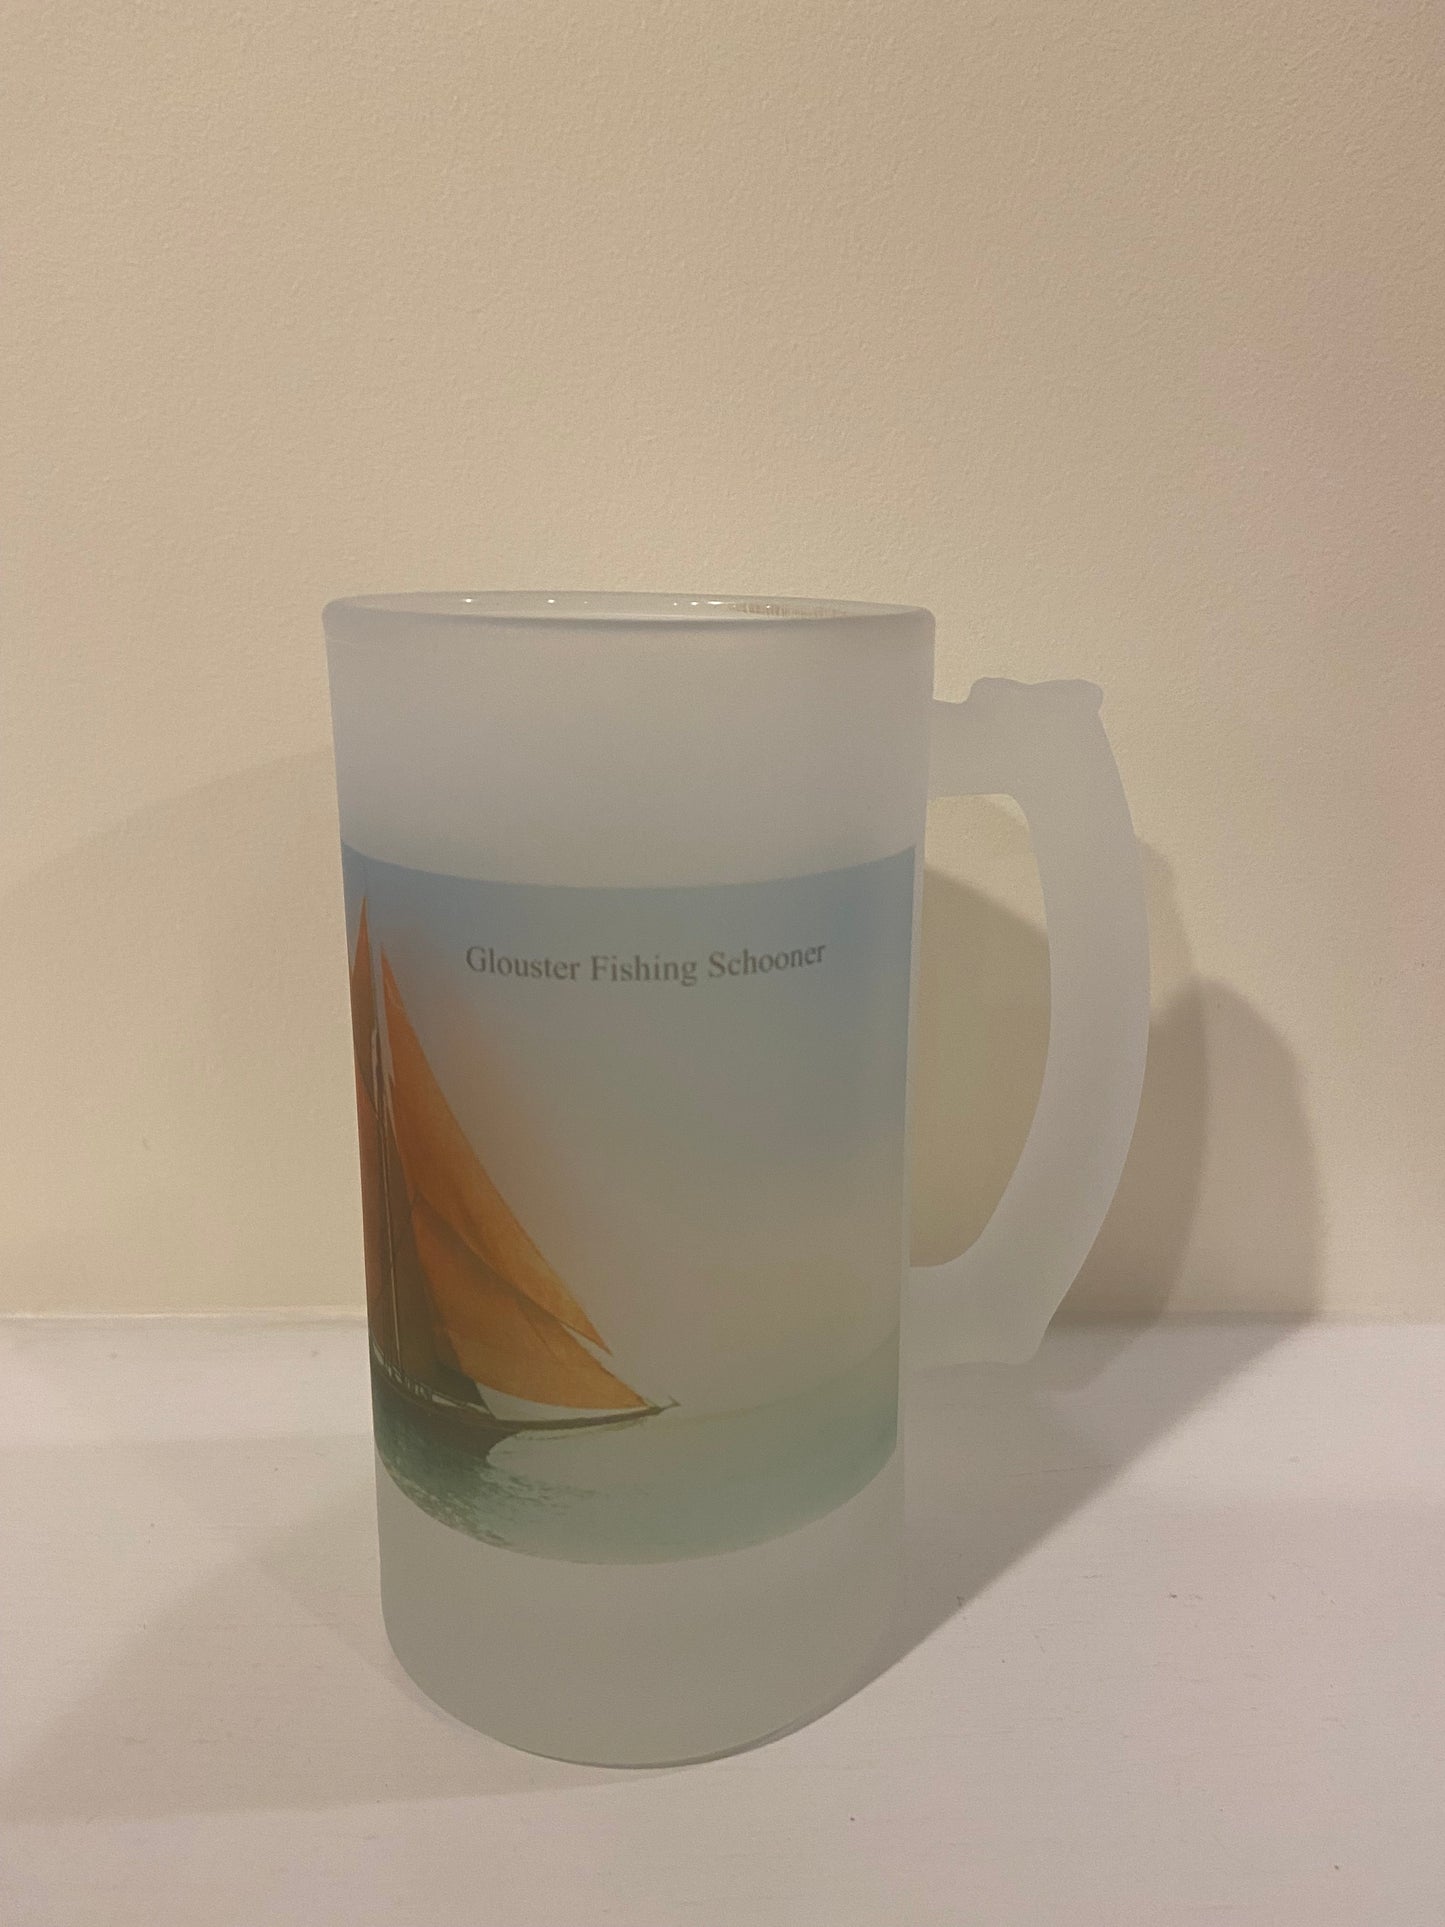 Colorful Frosted Glass Beer Mug Featuring 19th Century Hand Tint of A Gloucester Fishing Schooner